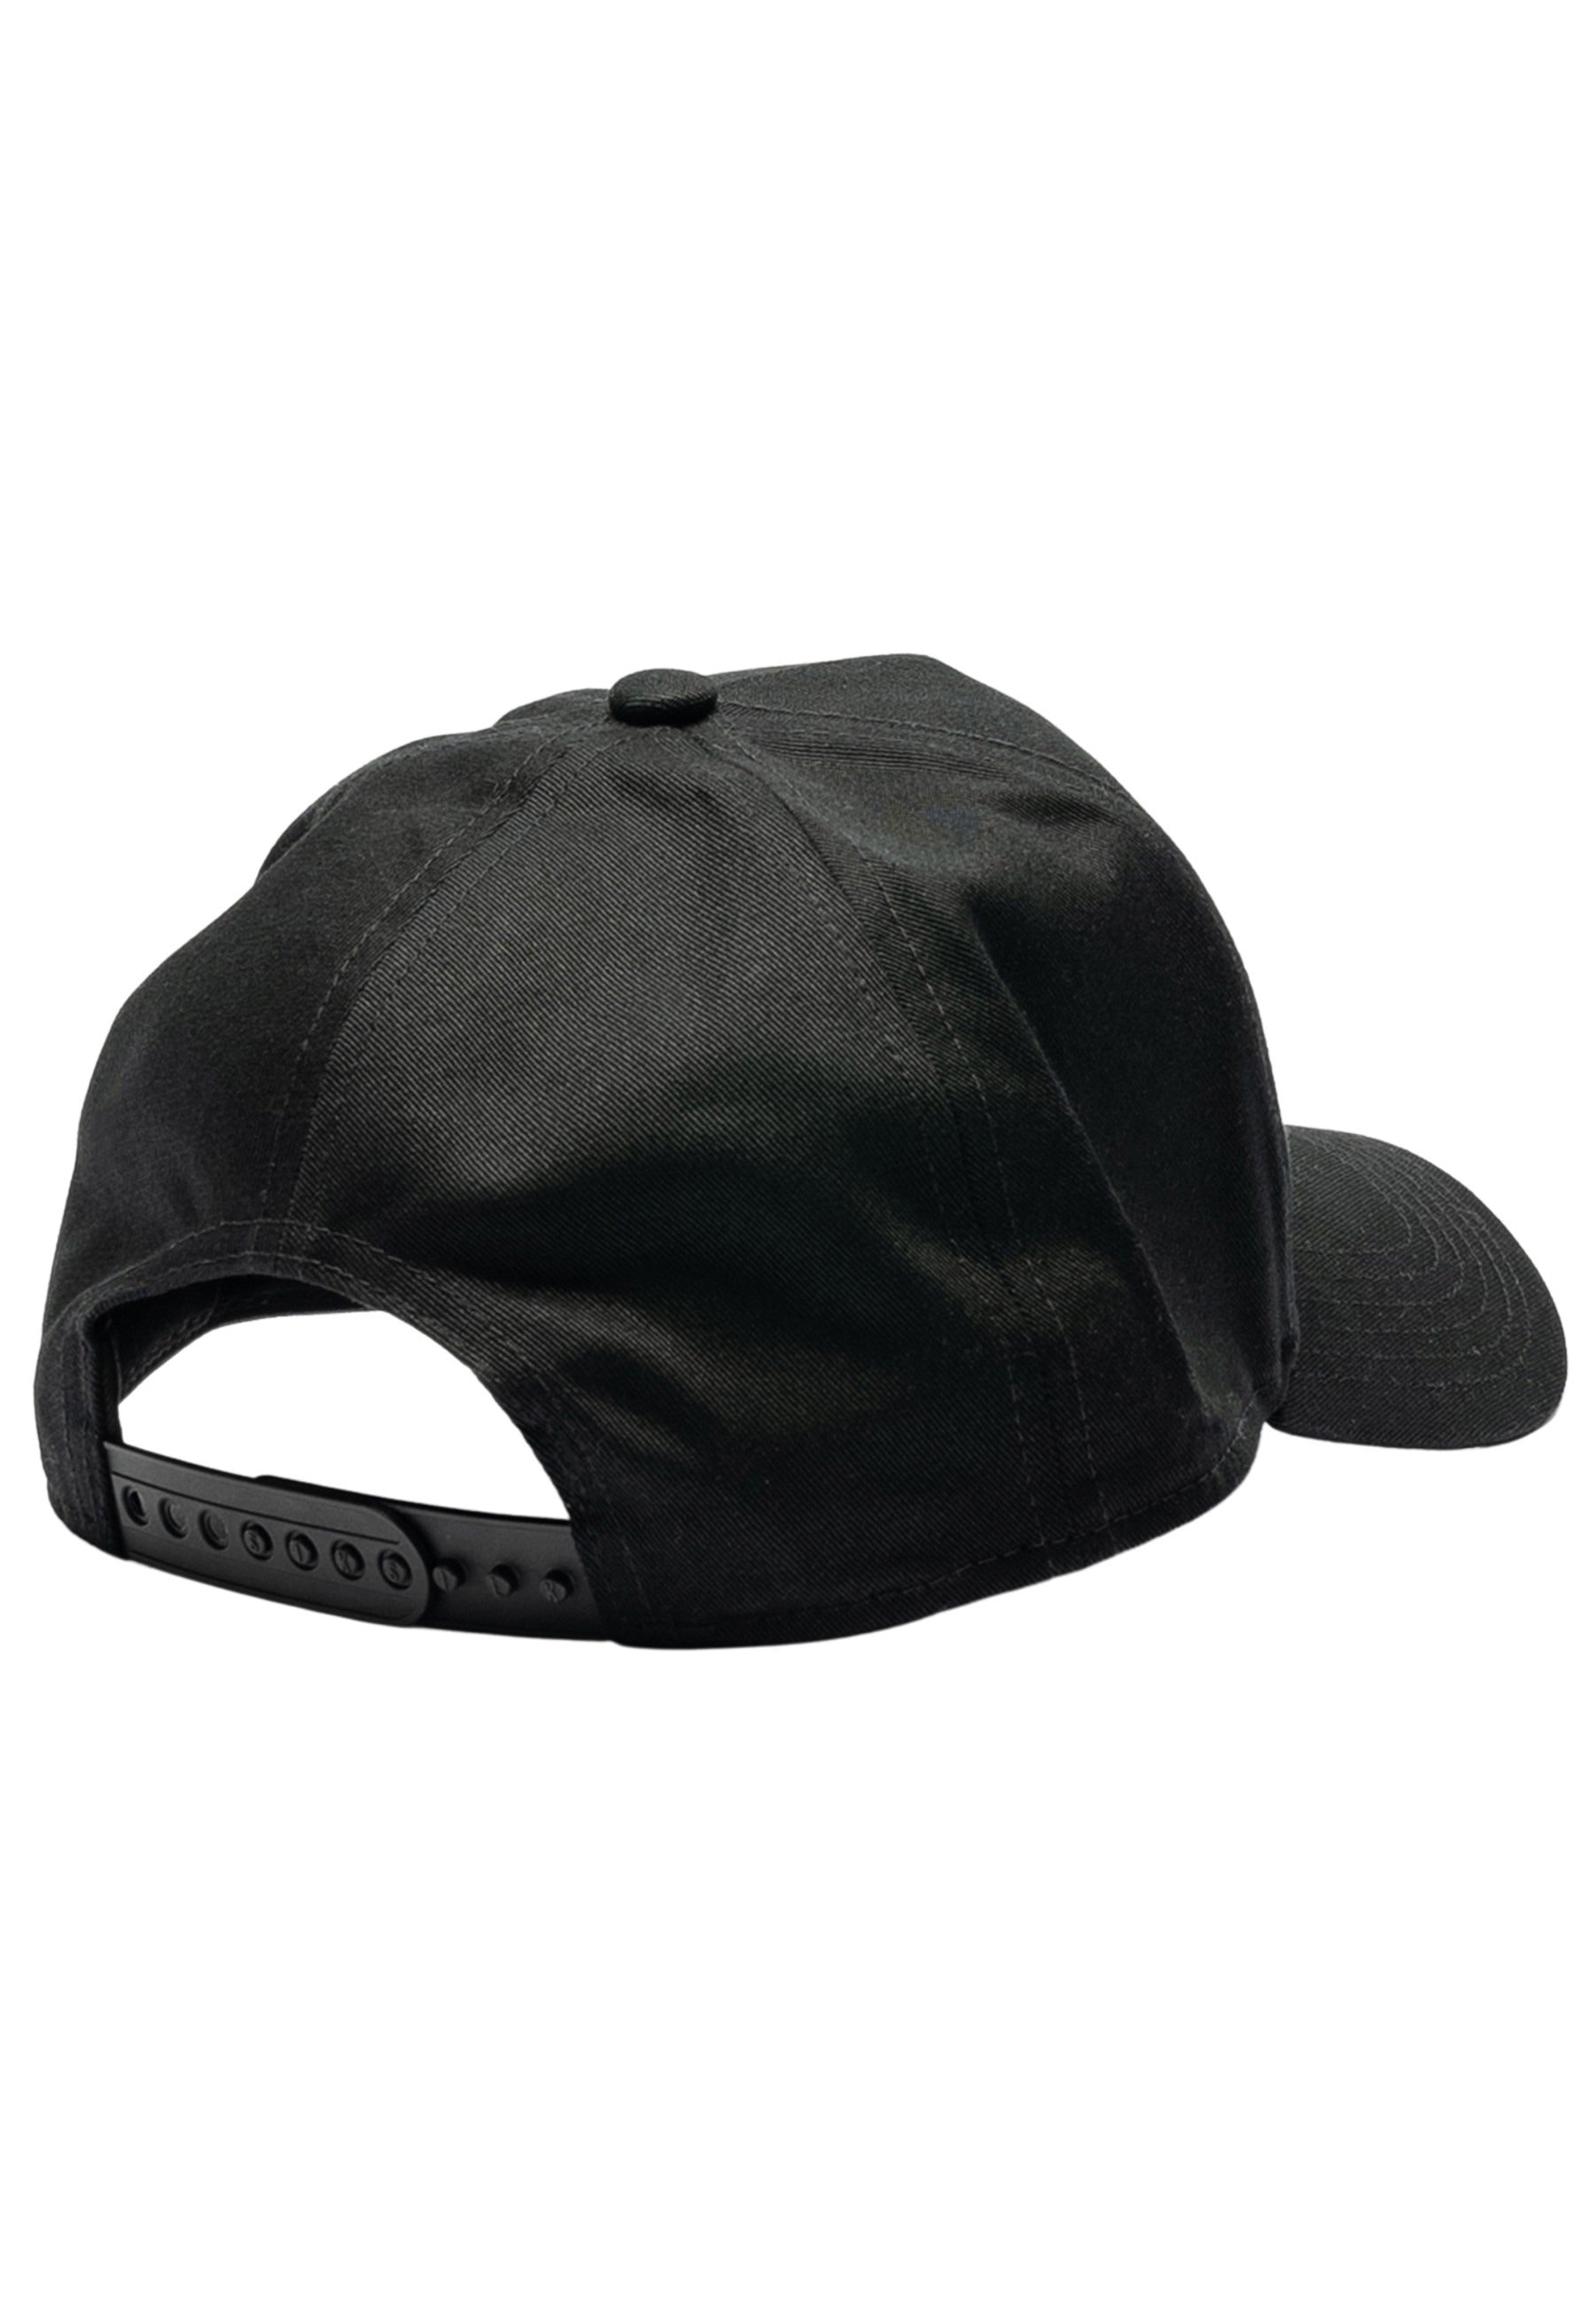 Floral Embroidery Trucker Cap in Black Caps SikSilk   